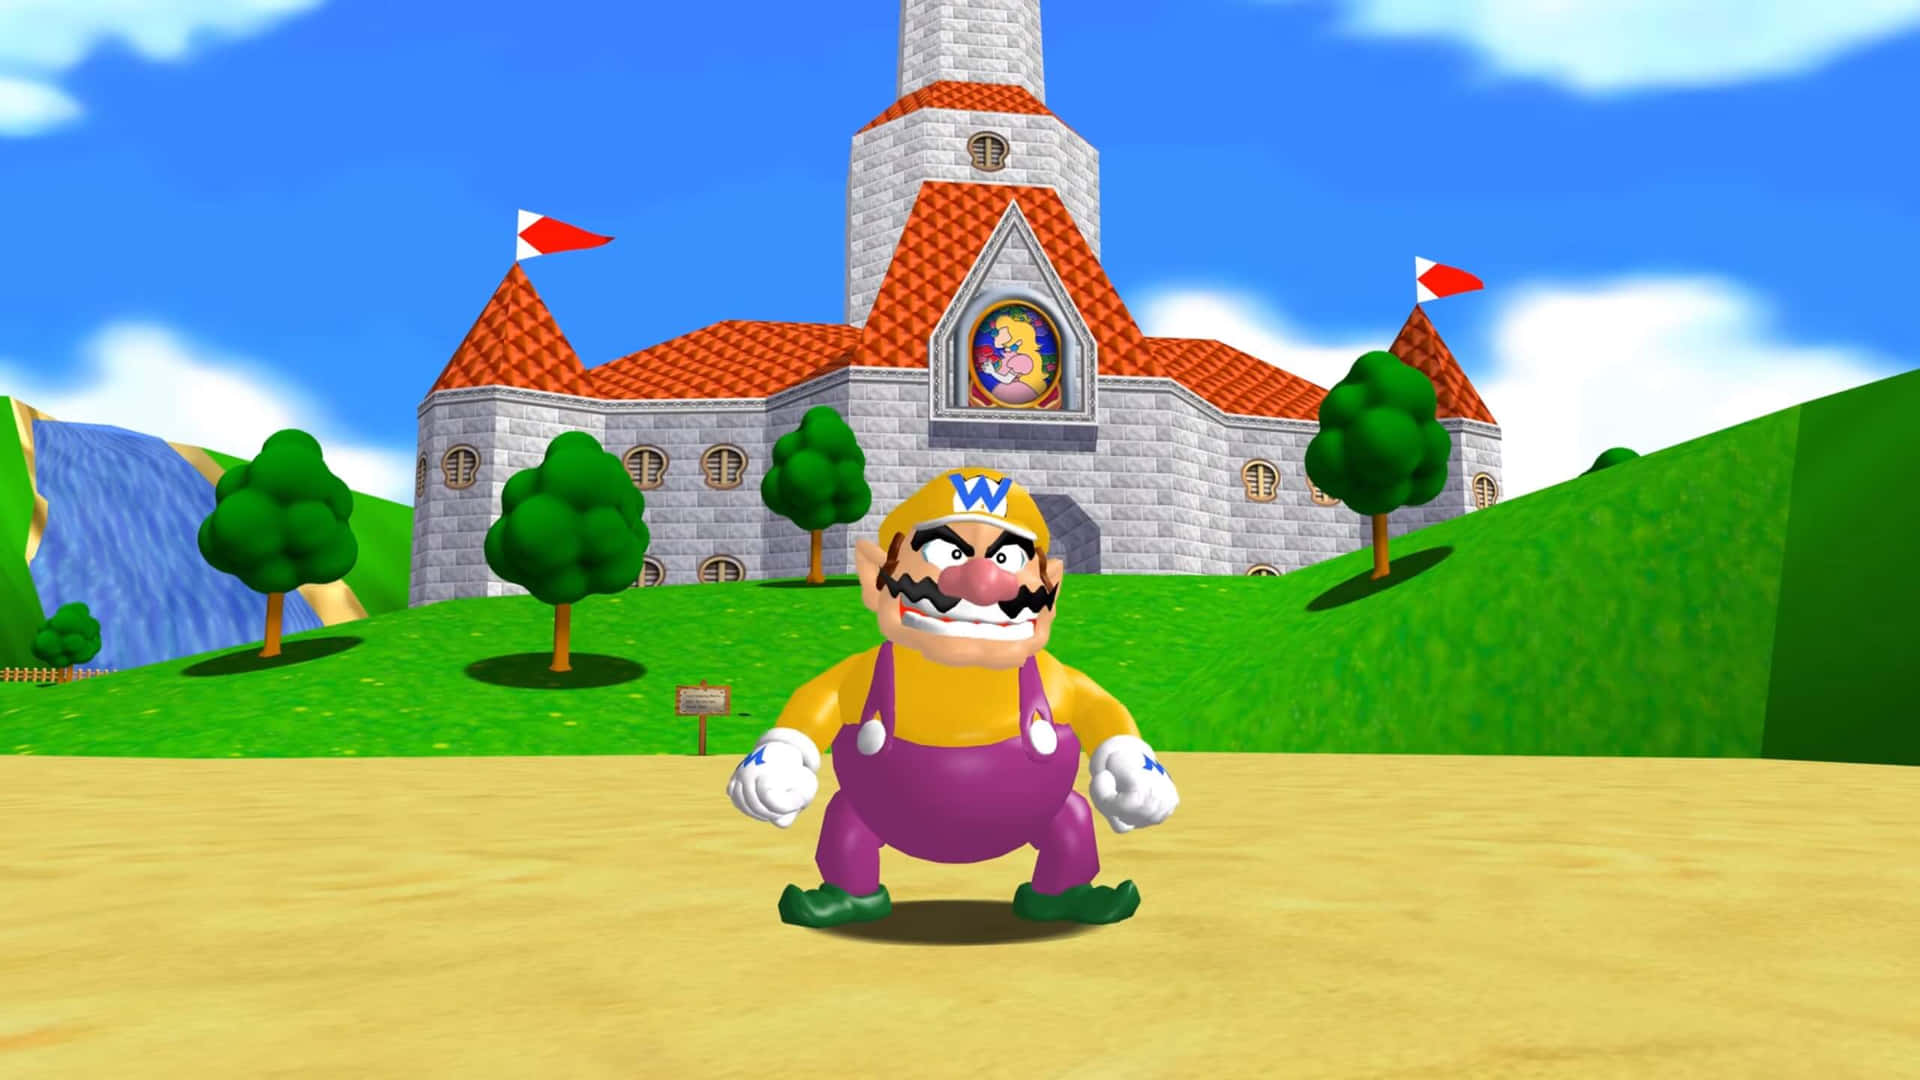 Wario in his classic outfit, smirking against a colorful abstract background Wallpaper